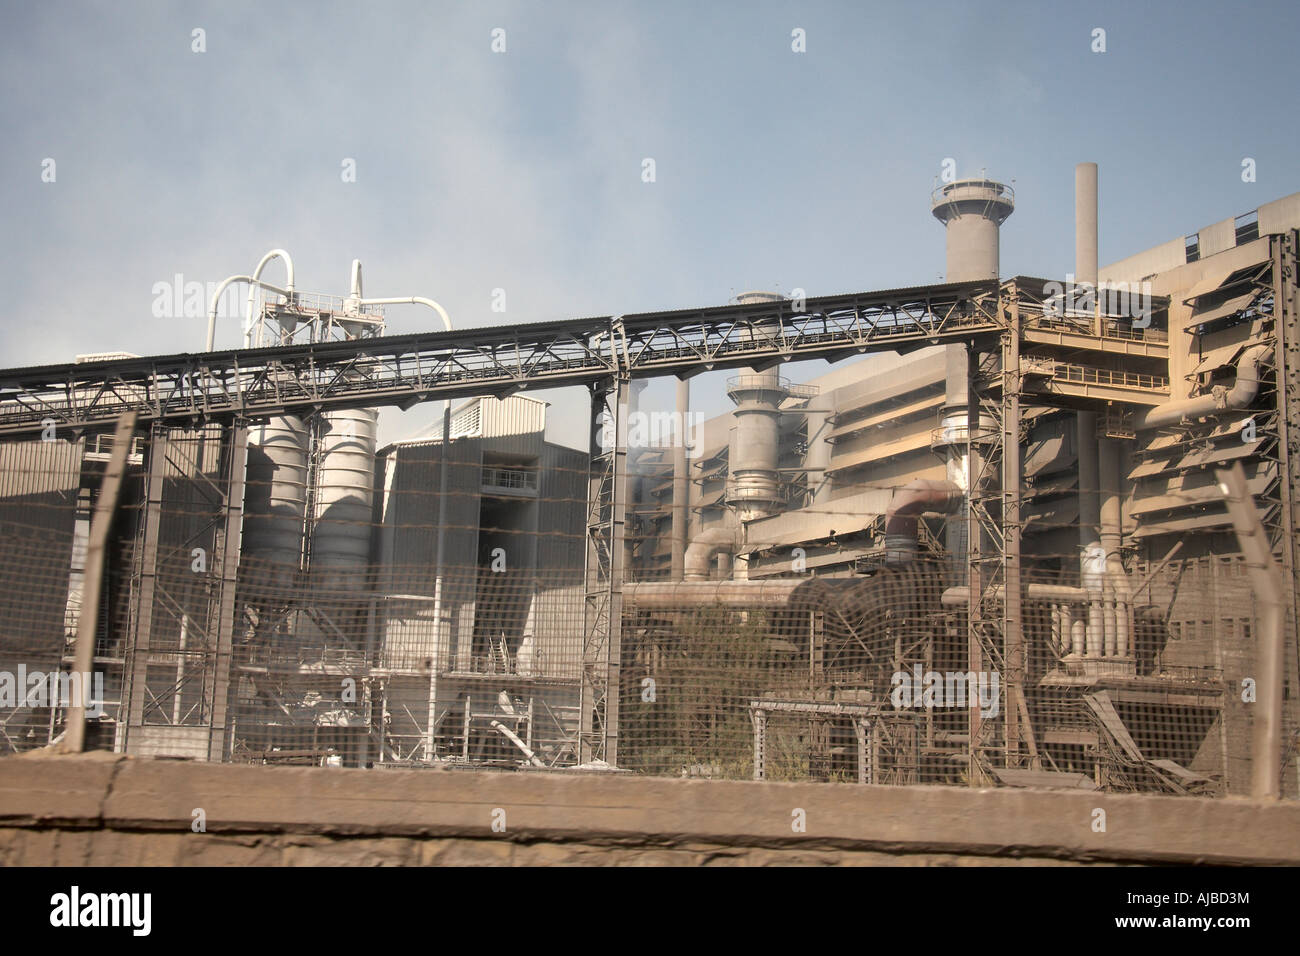 Works factory industrial complex near Edfu in Upper southern Egypt Africa Stock Photo